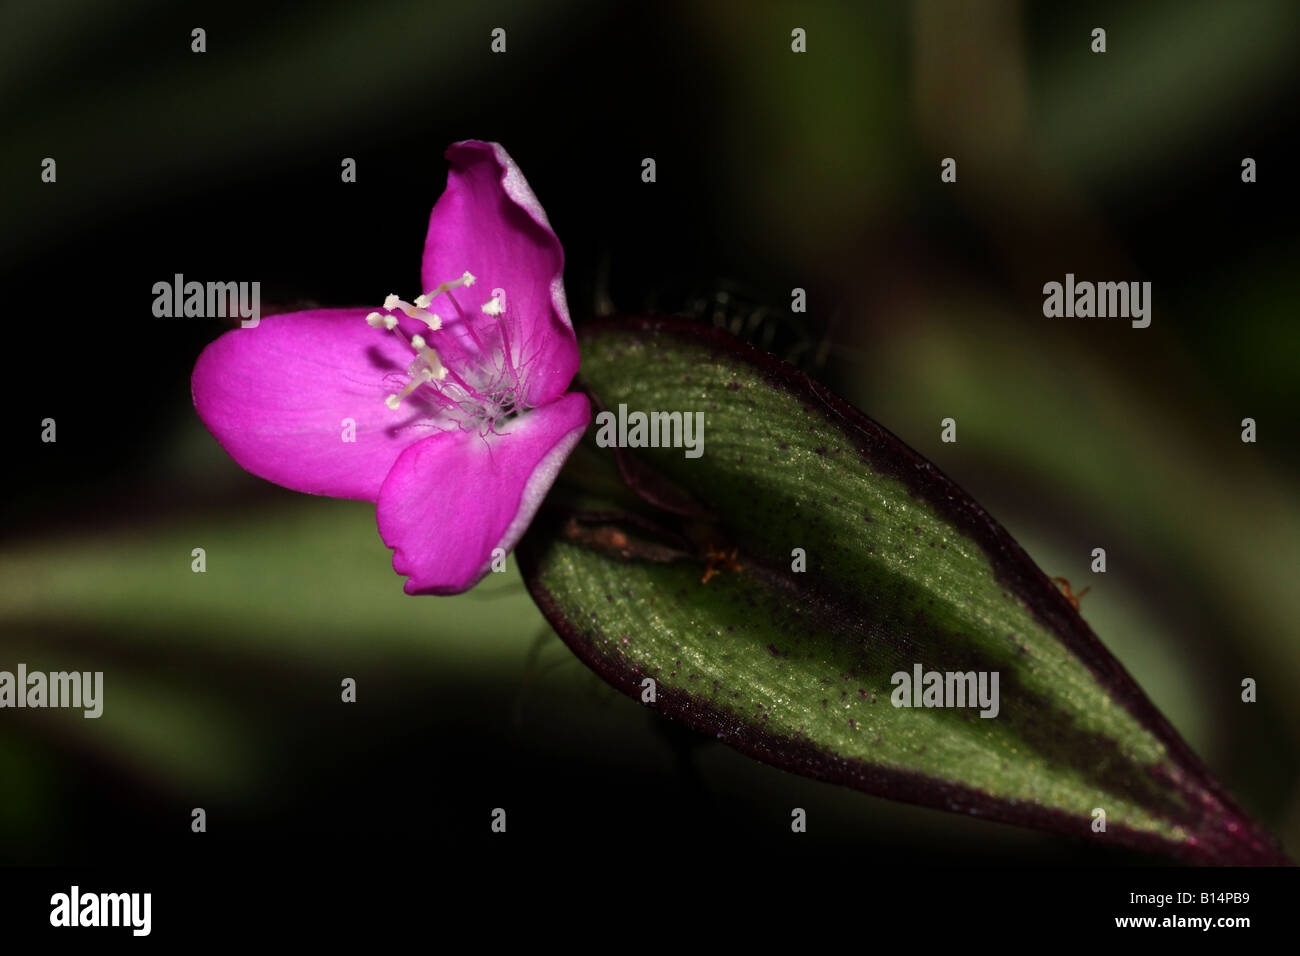 A small pink flower and its beautiful succulent leave Stock Photo